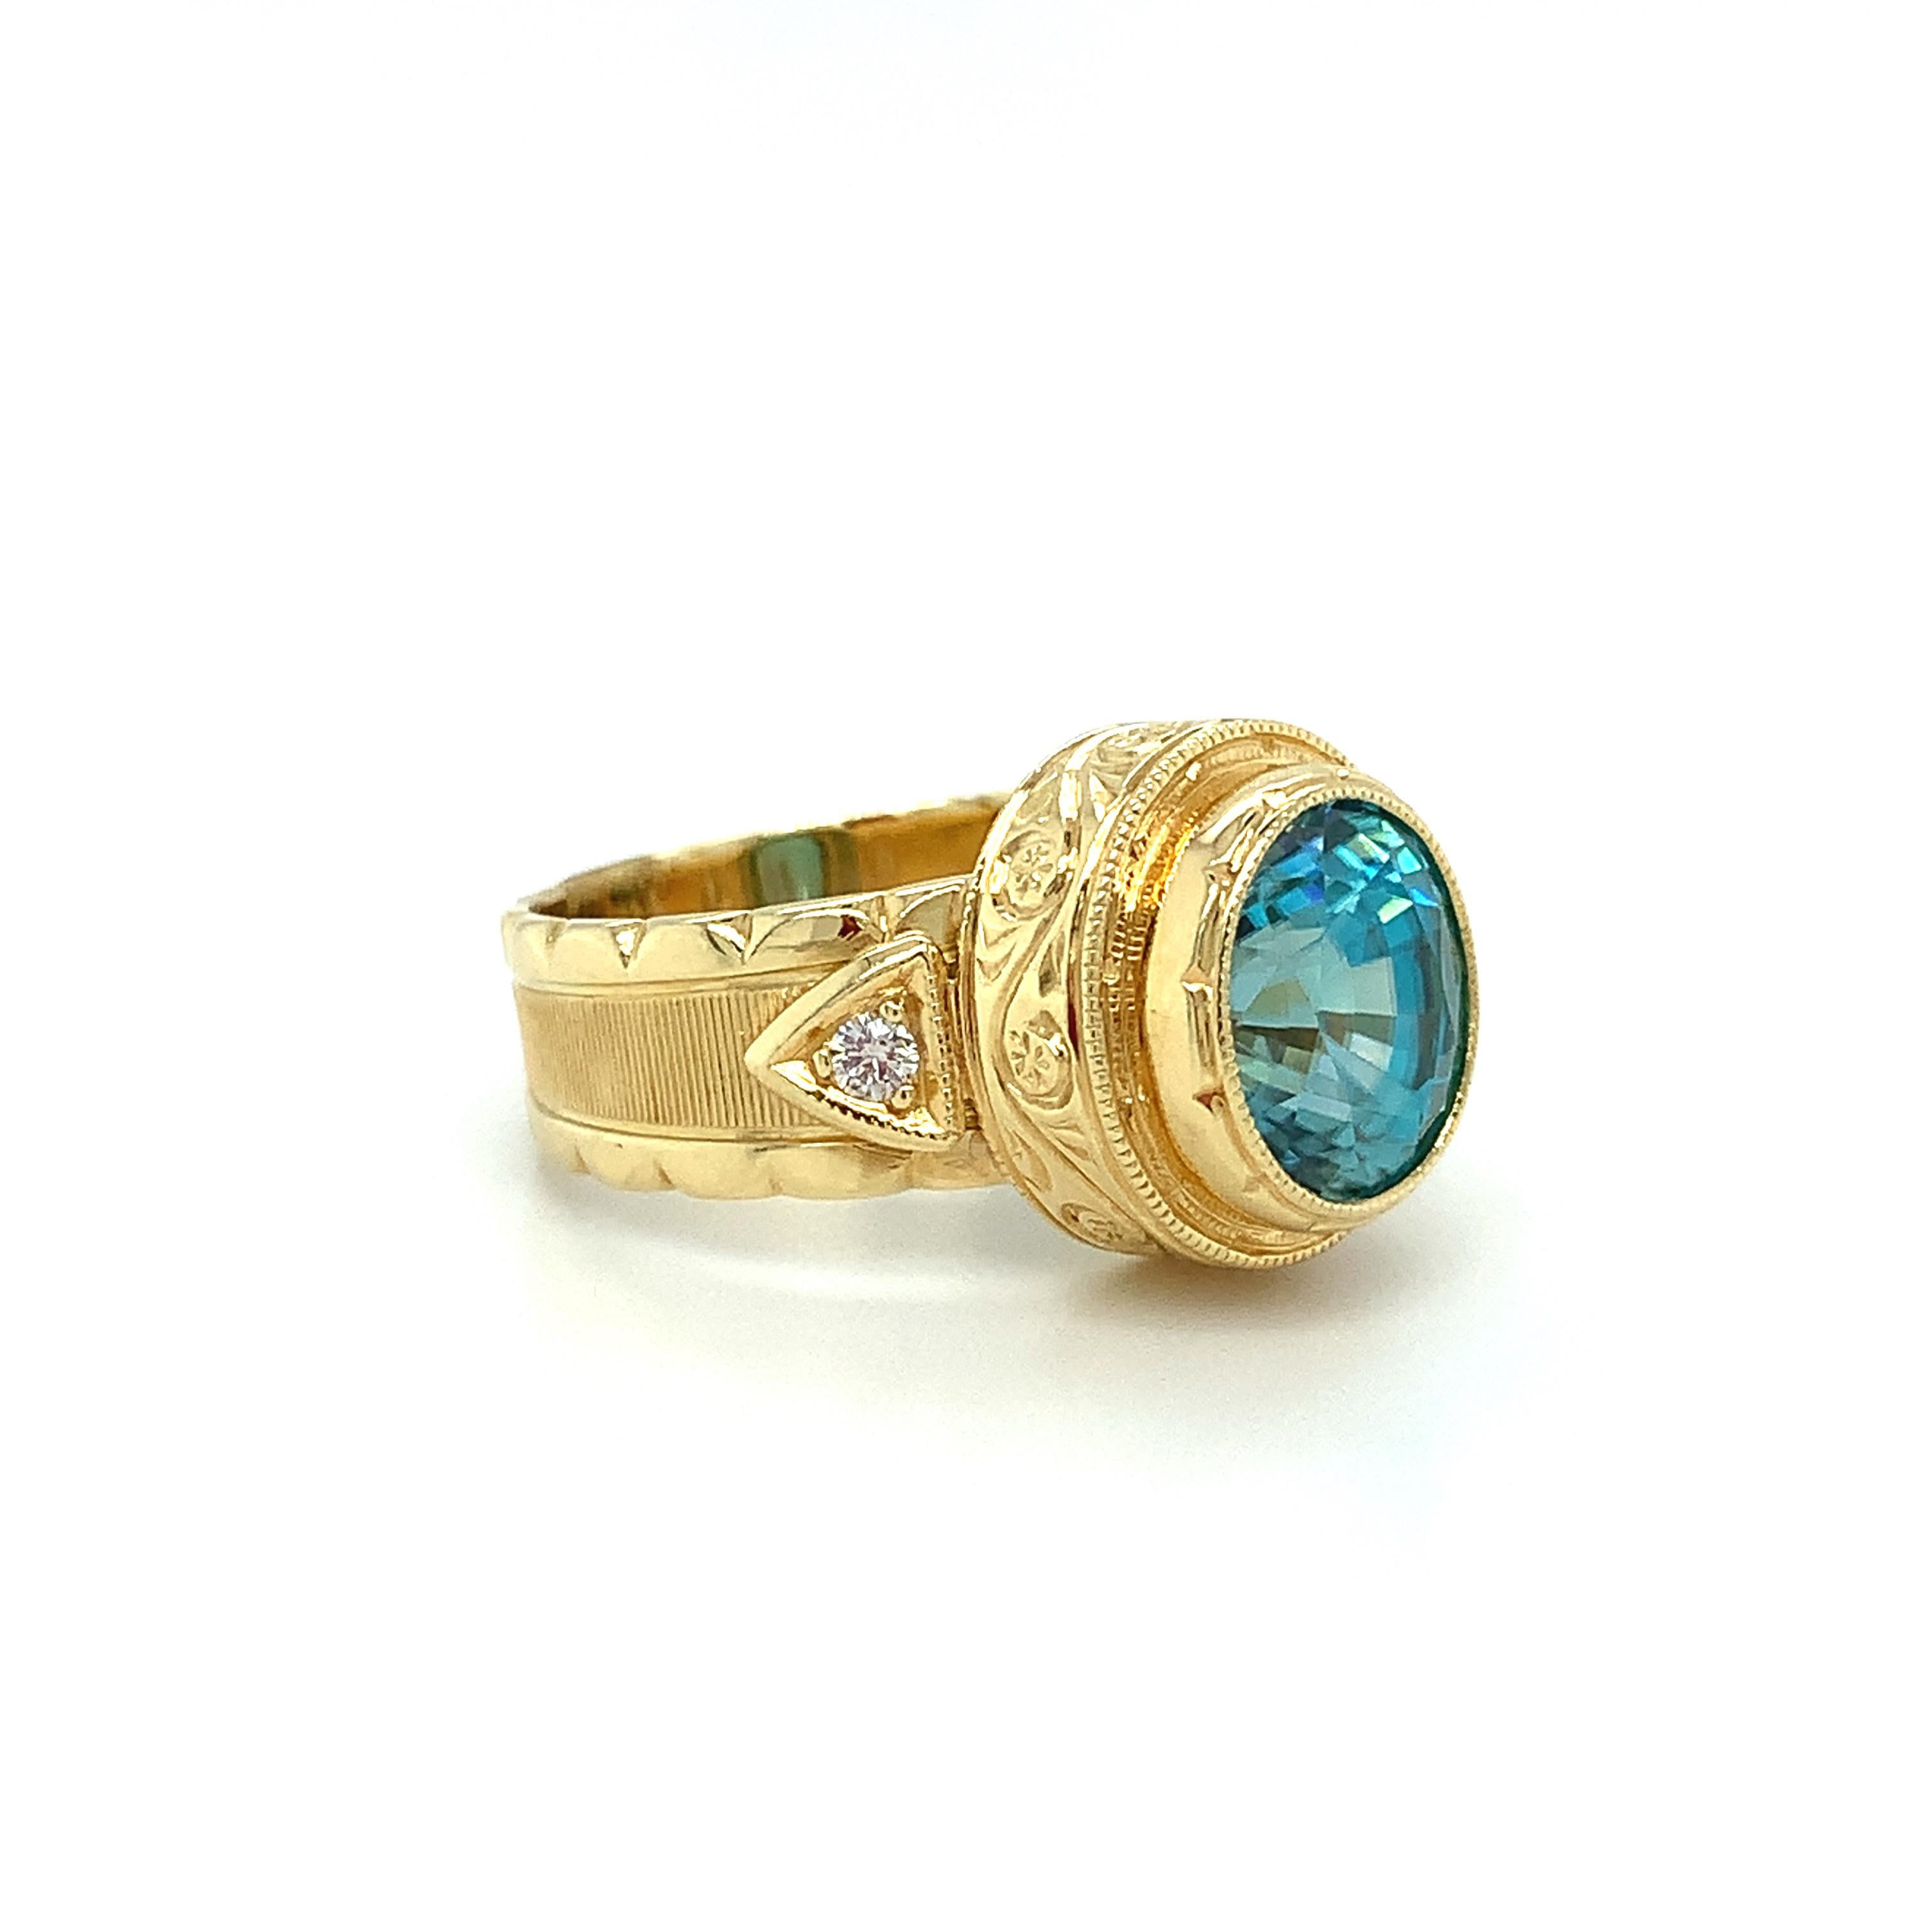 Oval Cut 4.72 Carat Blue Zircon and Diamond Hand-Engraved Band Ring in 18k Yellow Gold   For Sale